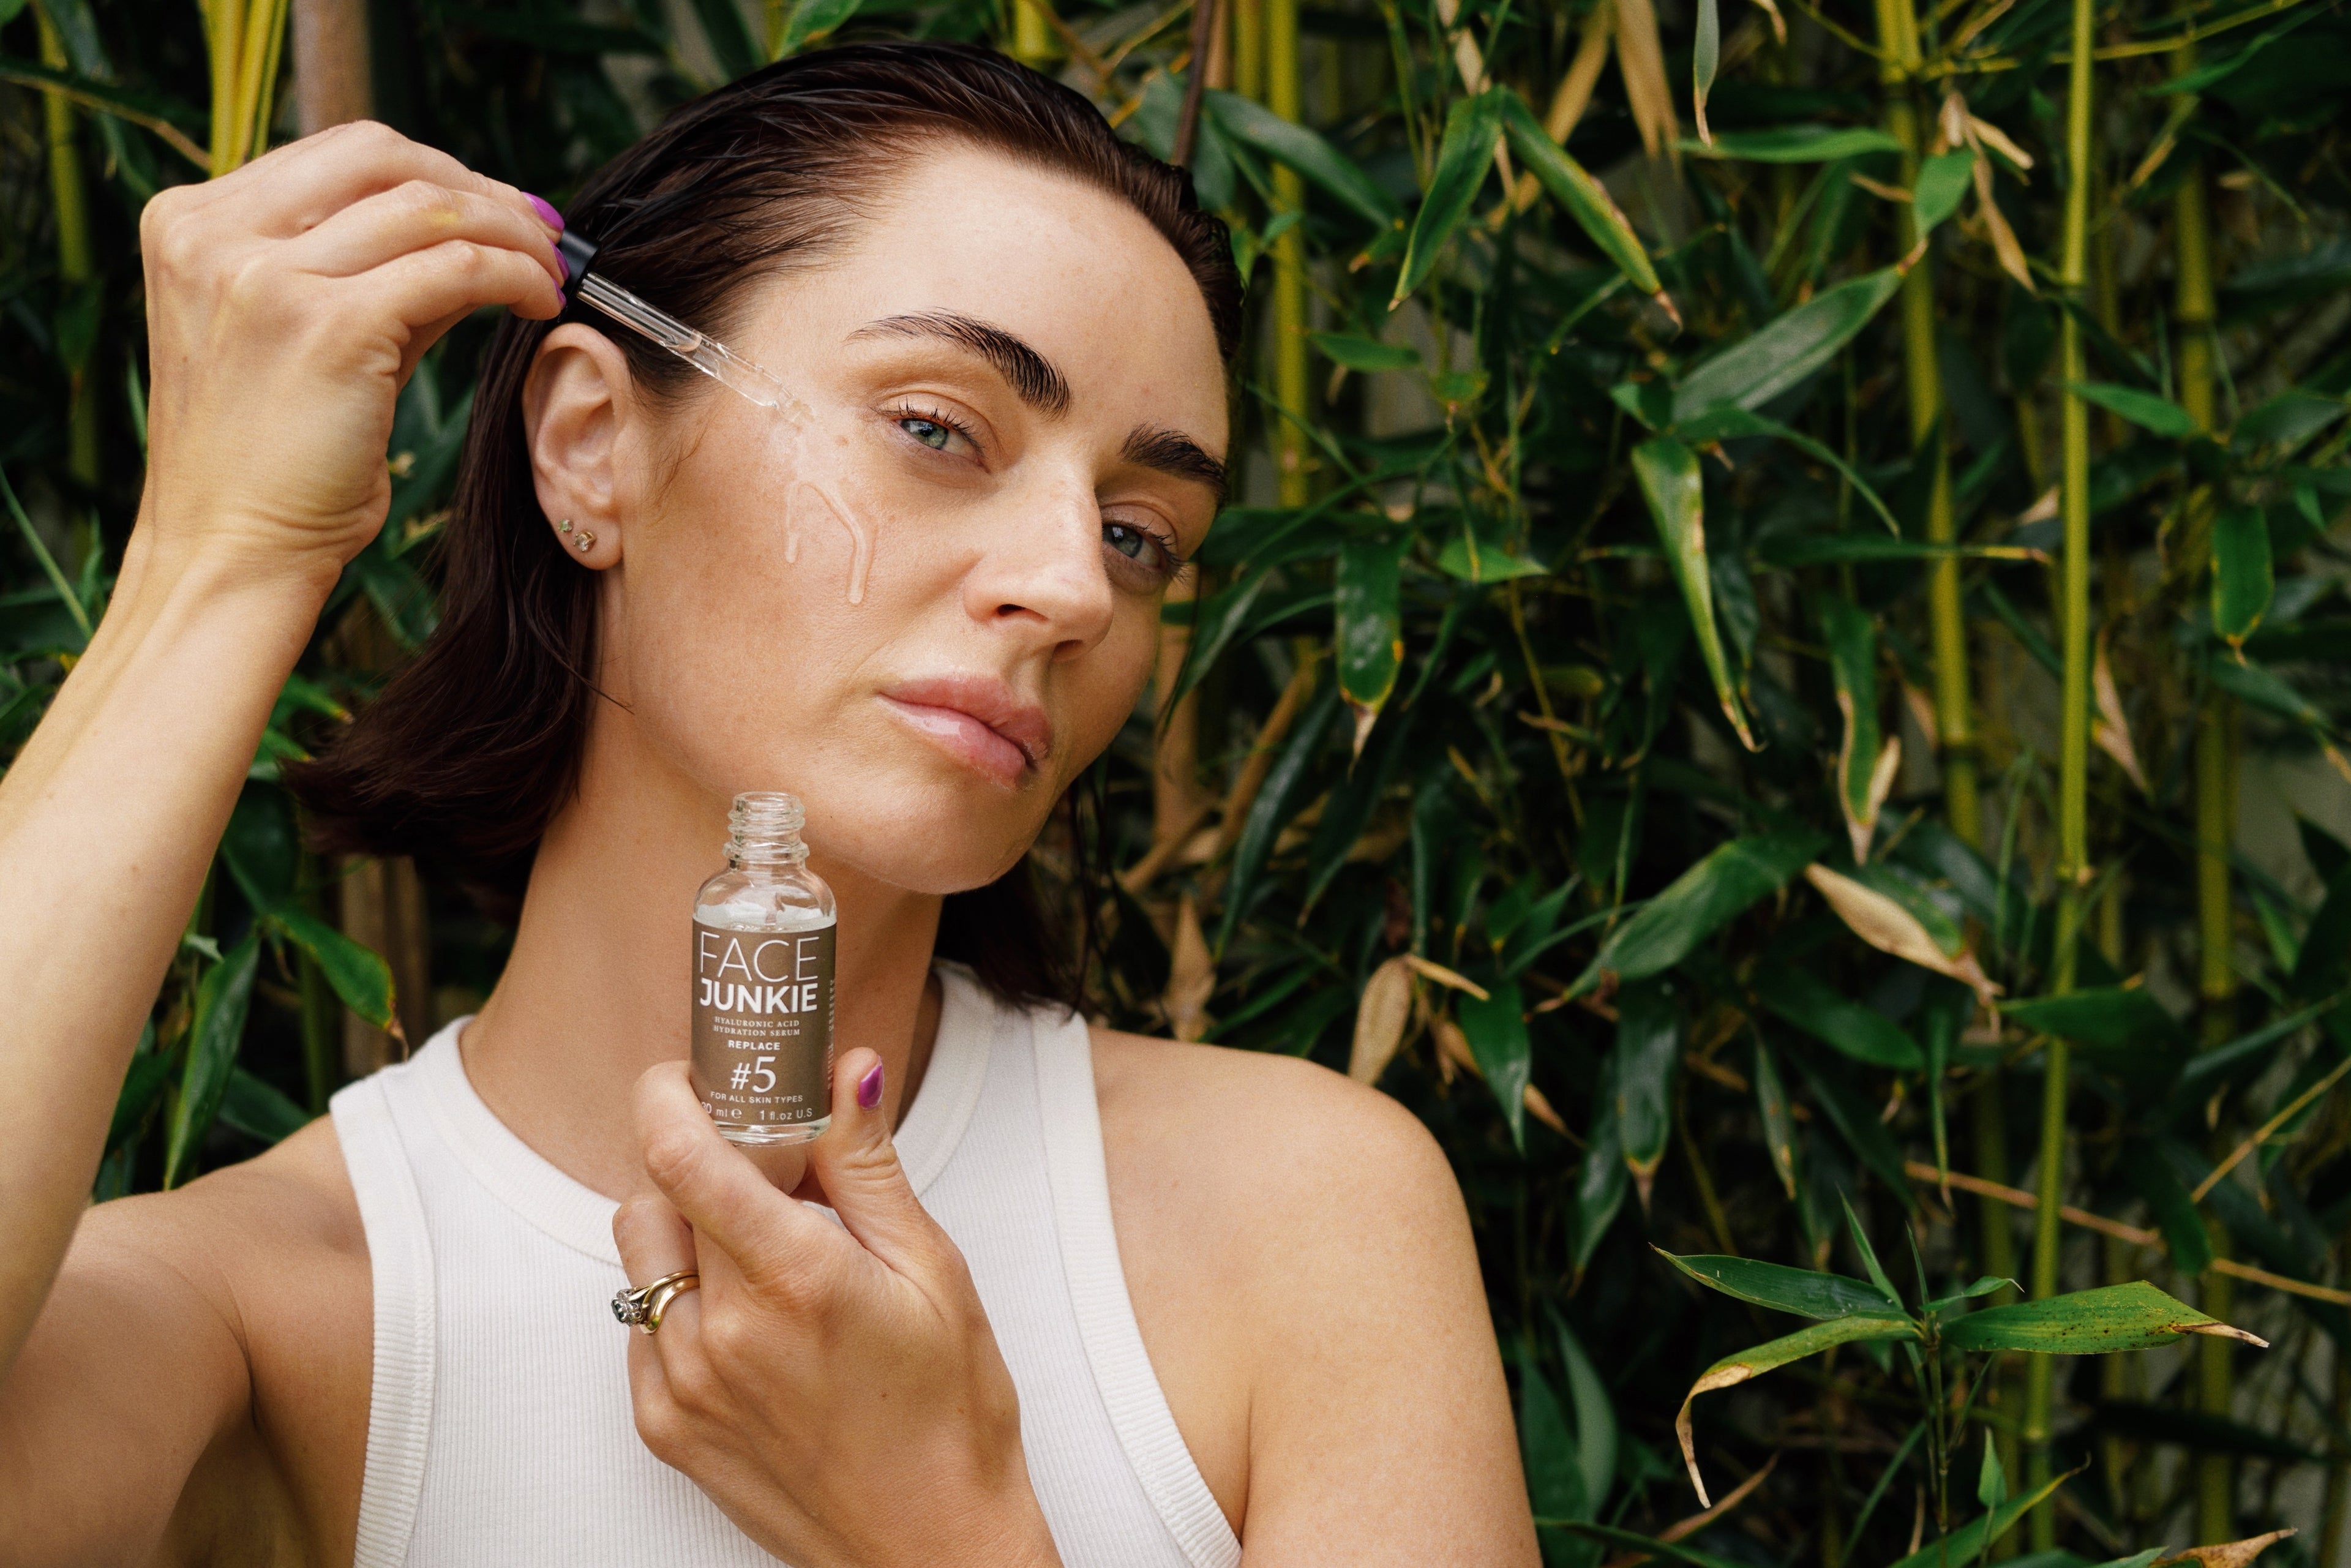 Jen Graham, the radiant face of the Face Junkie Summer Skin Campaign, strikes a pose while showcasing the #5 Hyaluronic Acid Hydrating Serum. In a captivating moment, she delicately drops the serum onto her cheek, embodying the essence of skincare indulgence and the promise of summer-ready, hydrated skin.